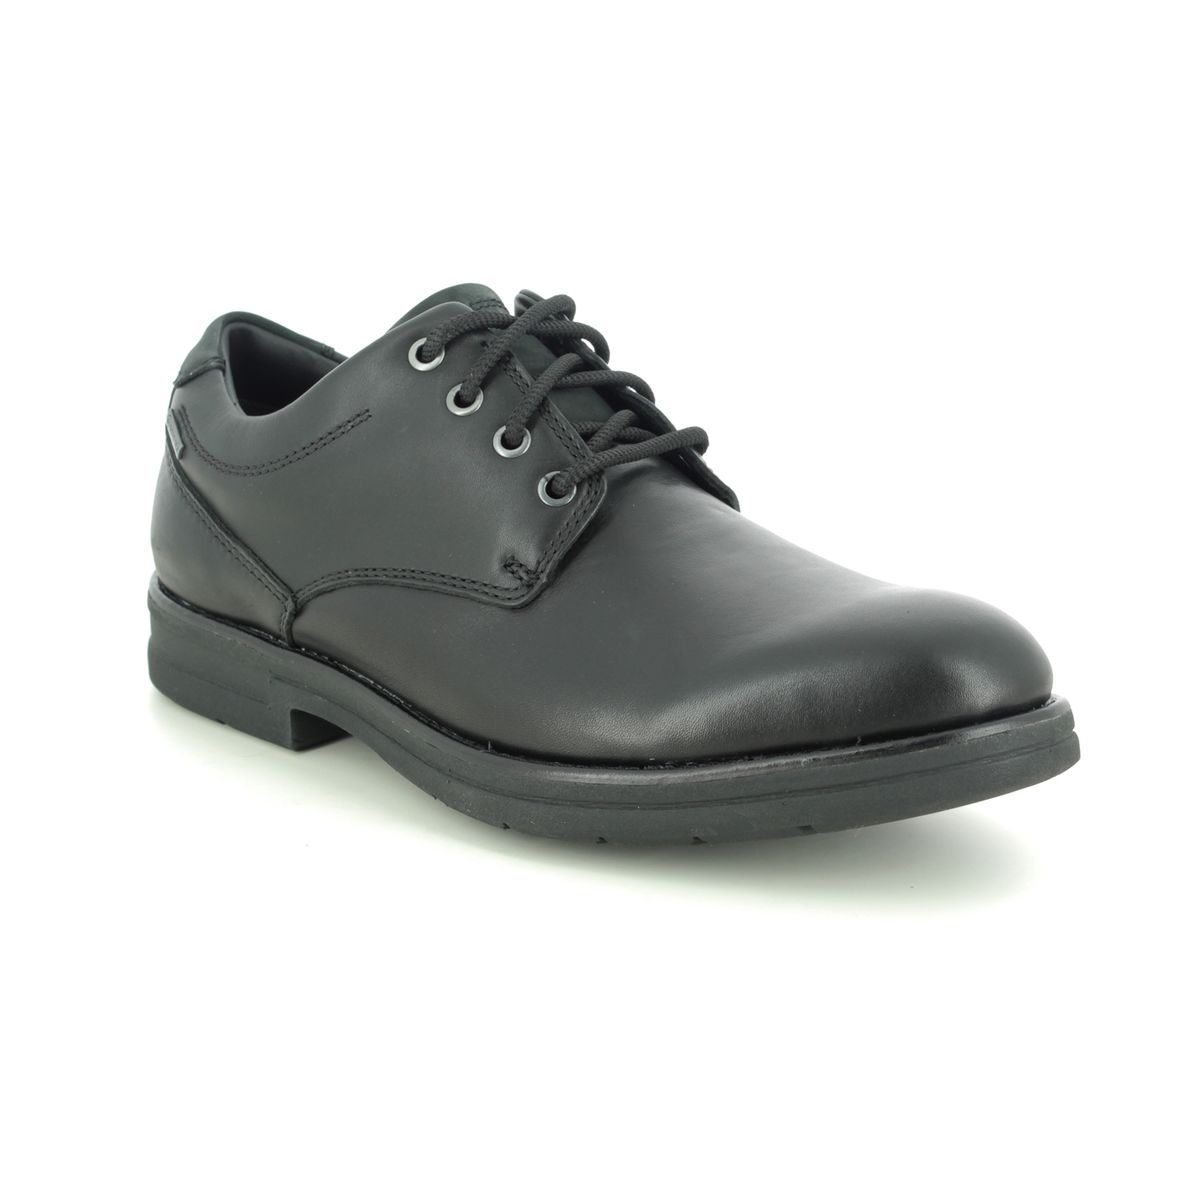 Clarks Banning Lo Gtx G Fit Black Leather Shoes